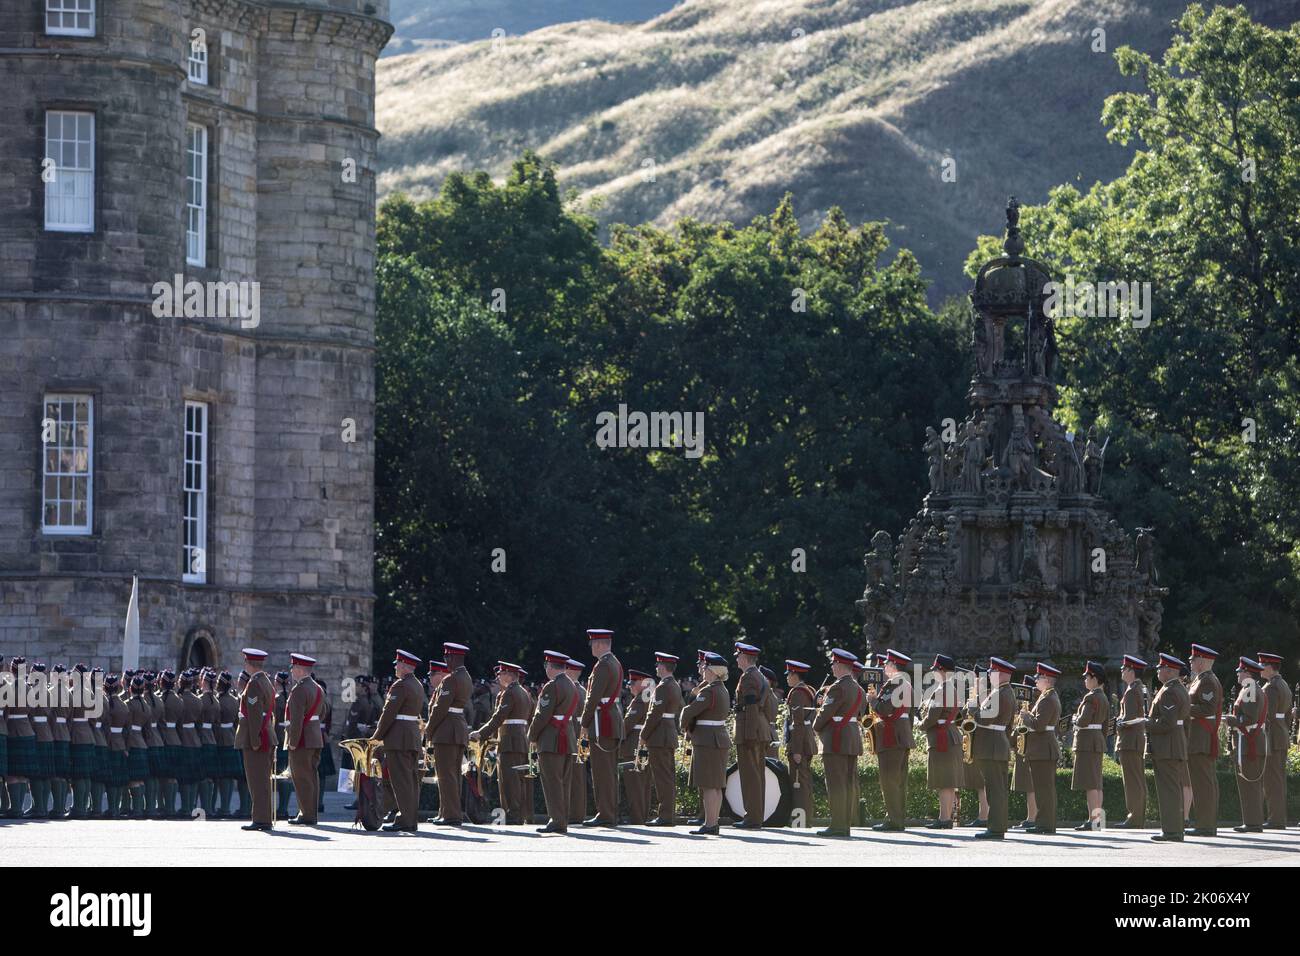 Edinburgh, Scotland, 10 September 2022. Military including the Royal Scots rehearse their movements at Palace of Holyroodhouse the day before the hearse arrives bearing the coffin of Her Majesty Queen Elizabeth II, in Edinburgh, Scotland, 10 September 2022. Photo credit: Jeremy Sutton-Hibbert/ Alamy Live news. Stock Photo